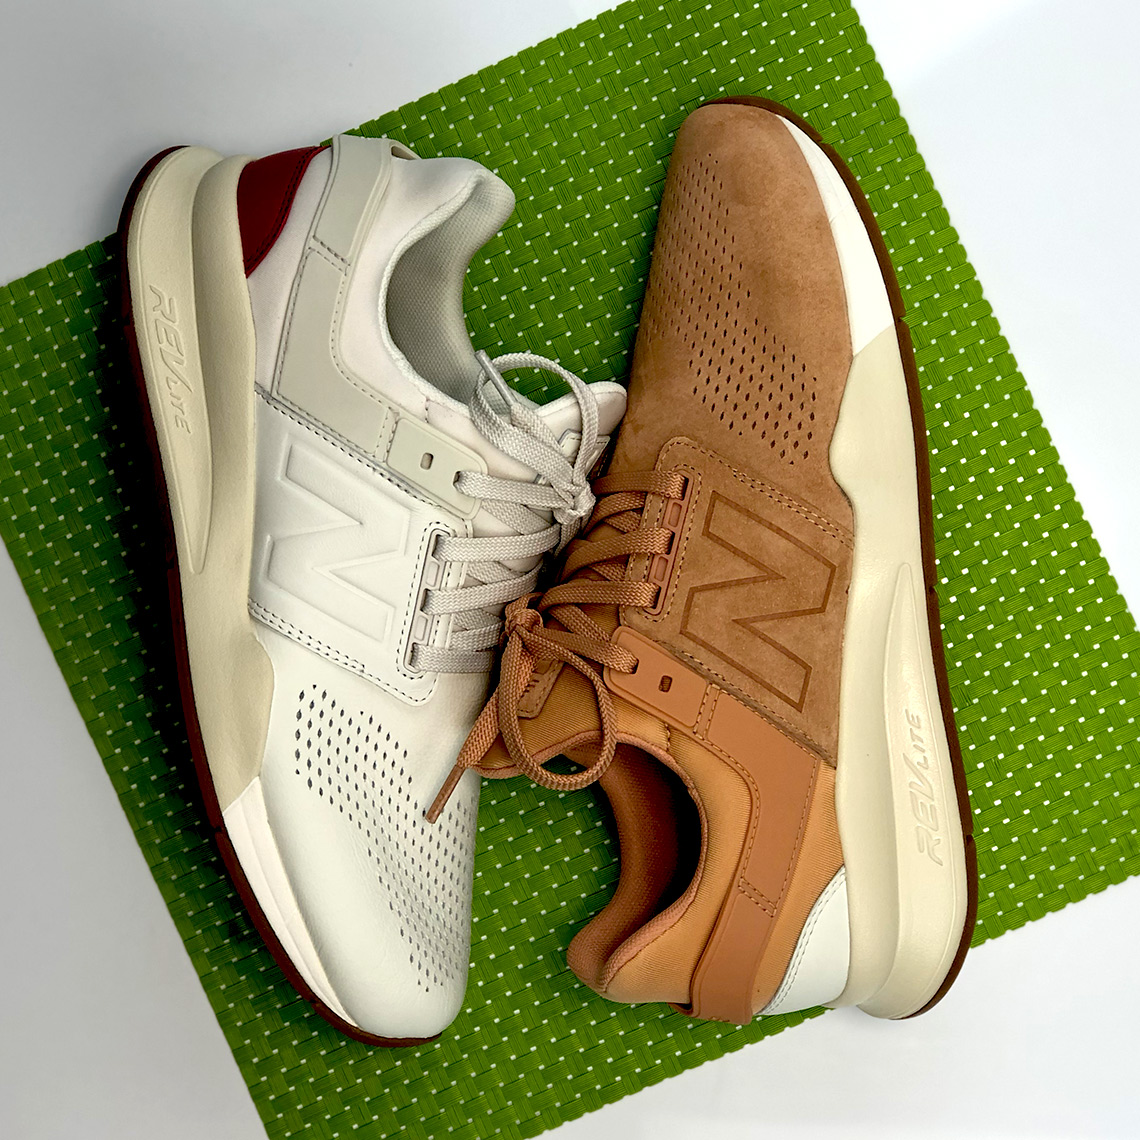 Hen Tyranny spray New Balance 247 v2 Suede Leather Available Now | SneakerNews.com